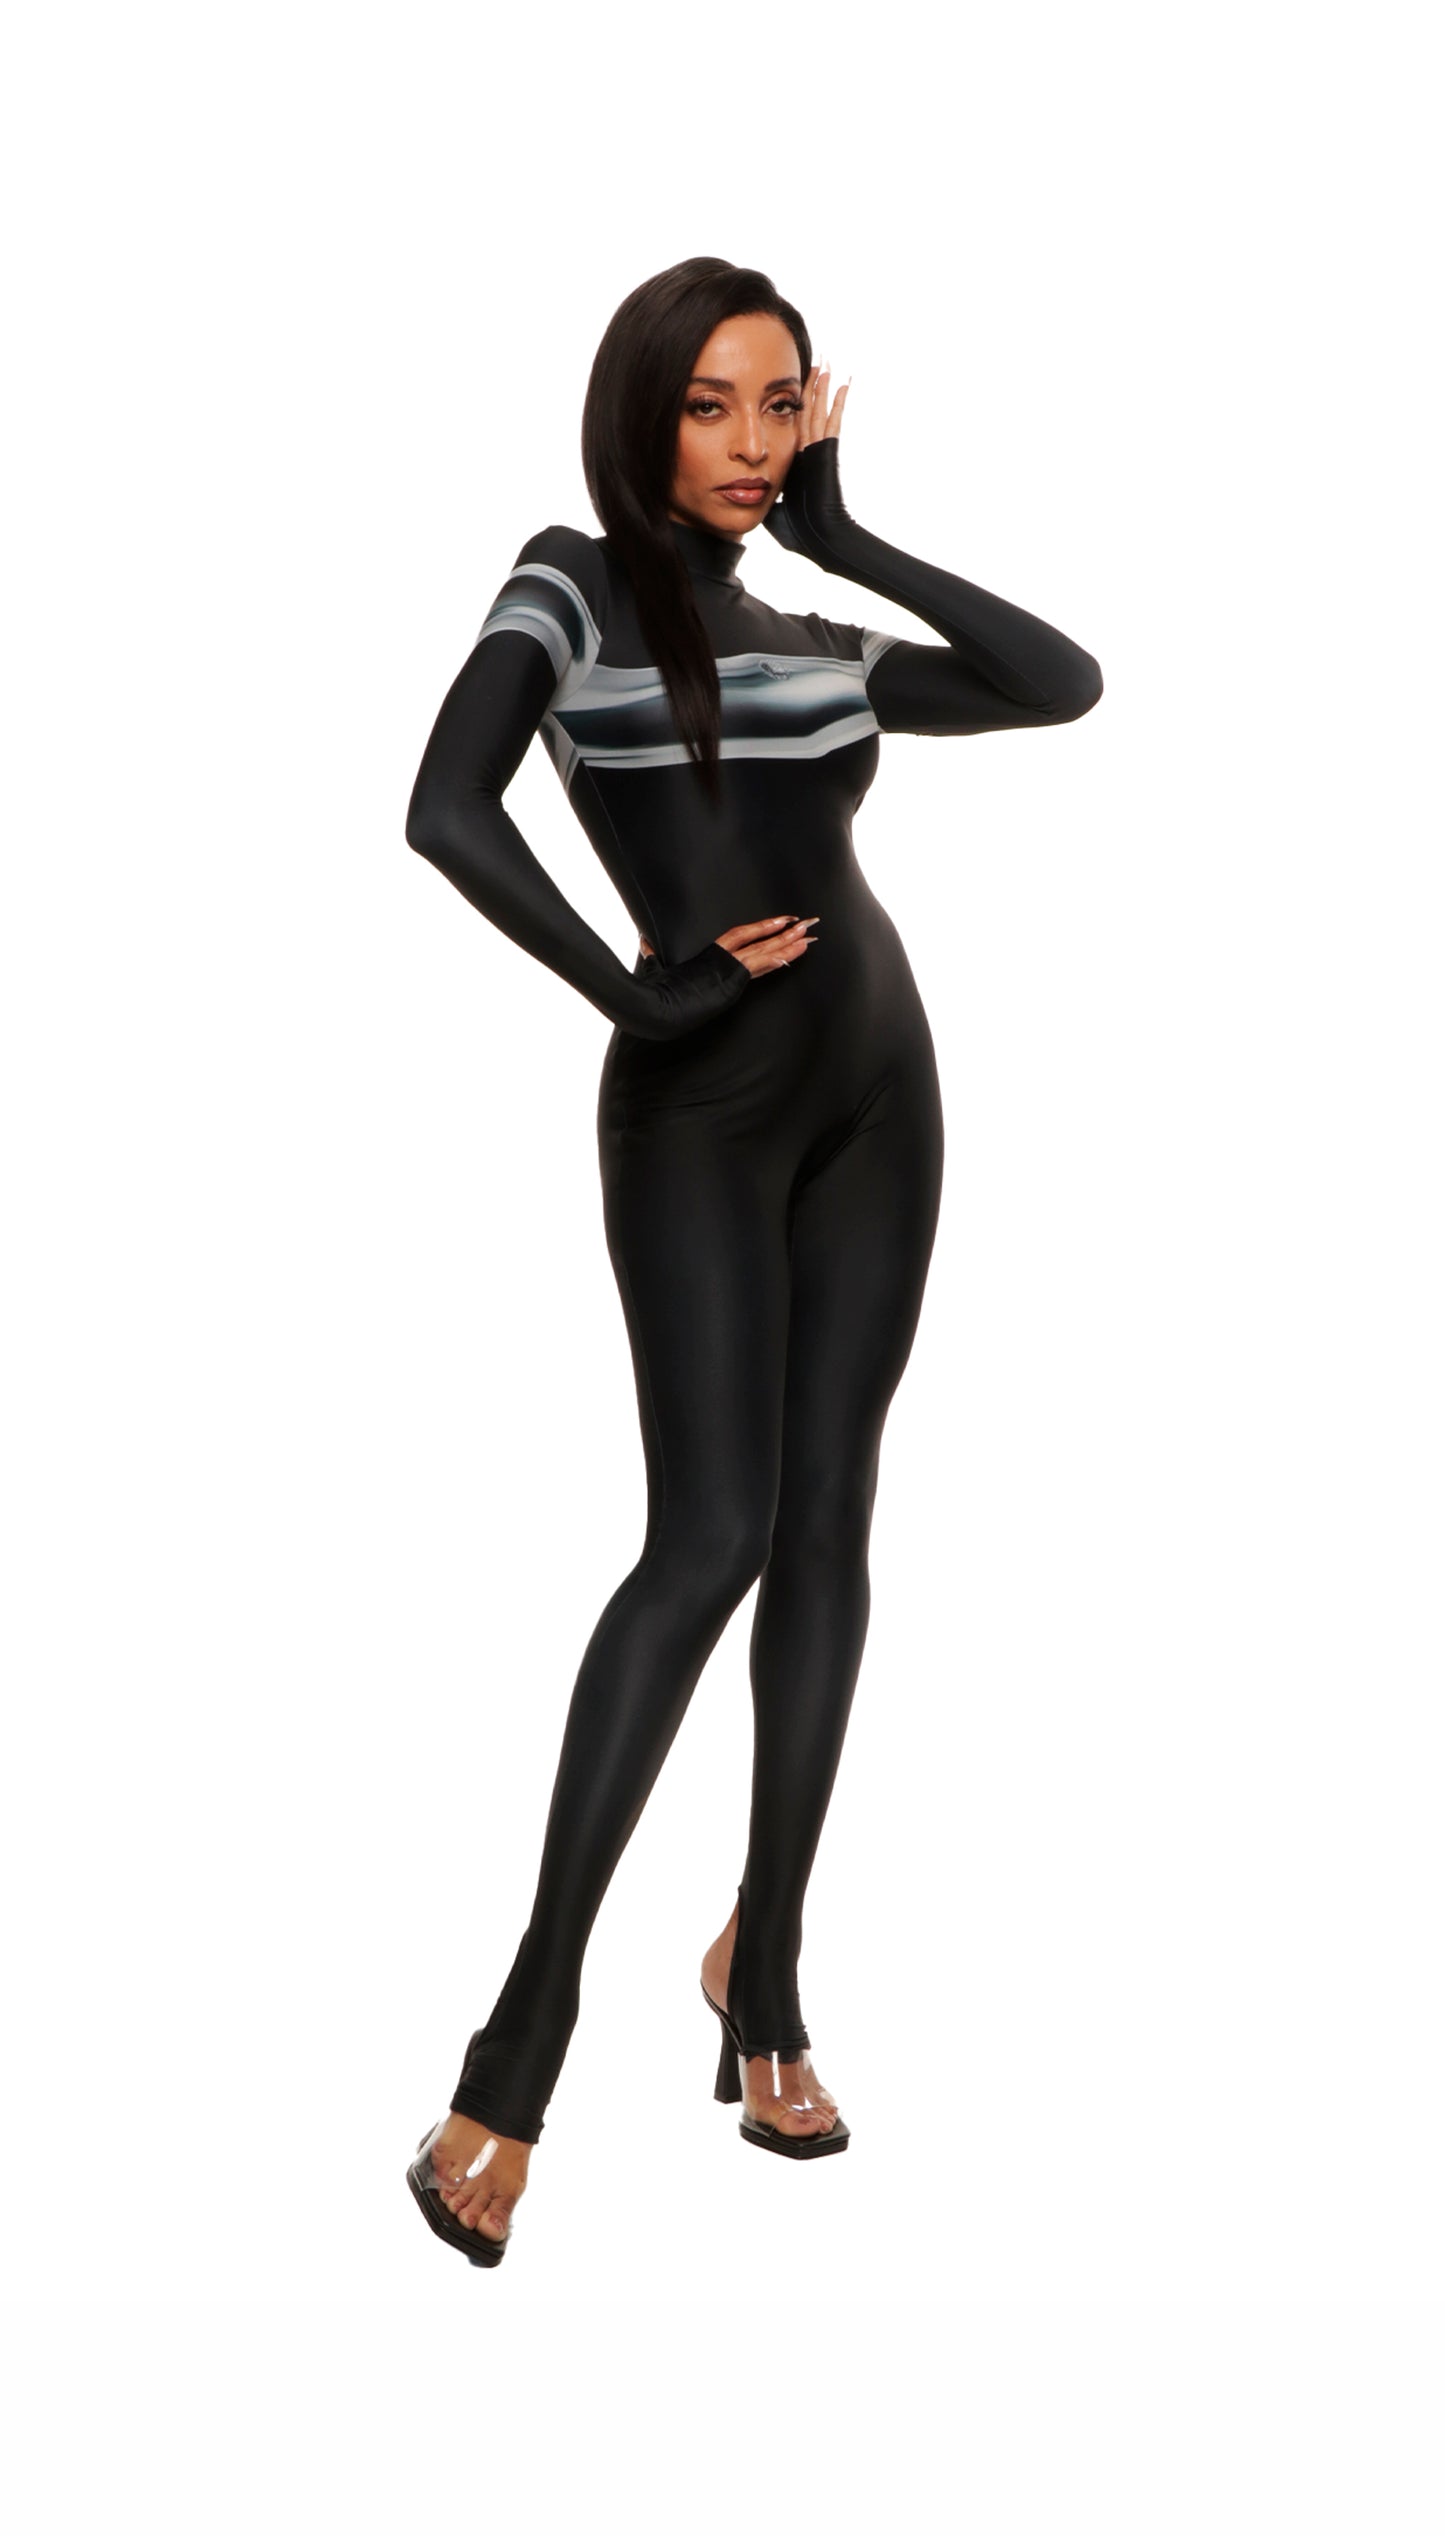 Woman wears black printed wetsuit or catsuit with chrome detail across chest and QR logo with heel cutout